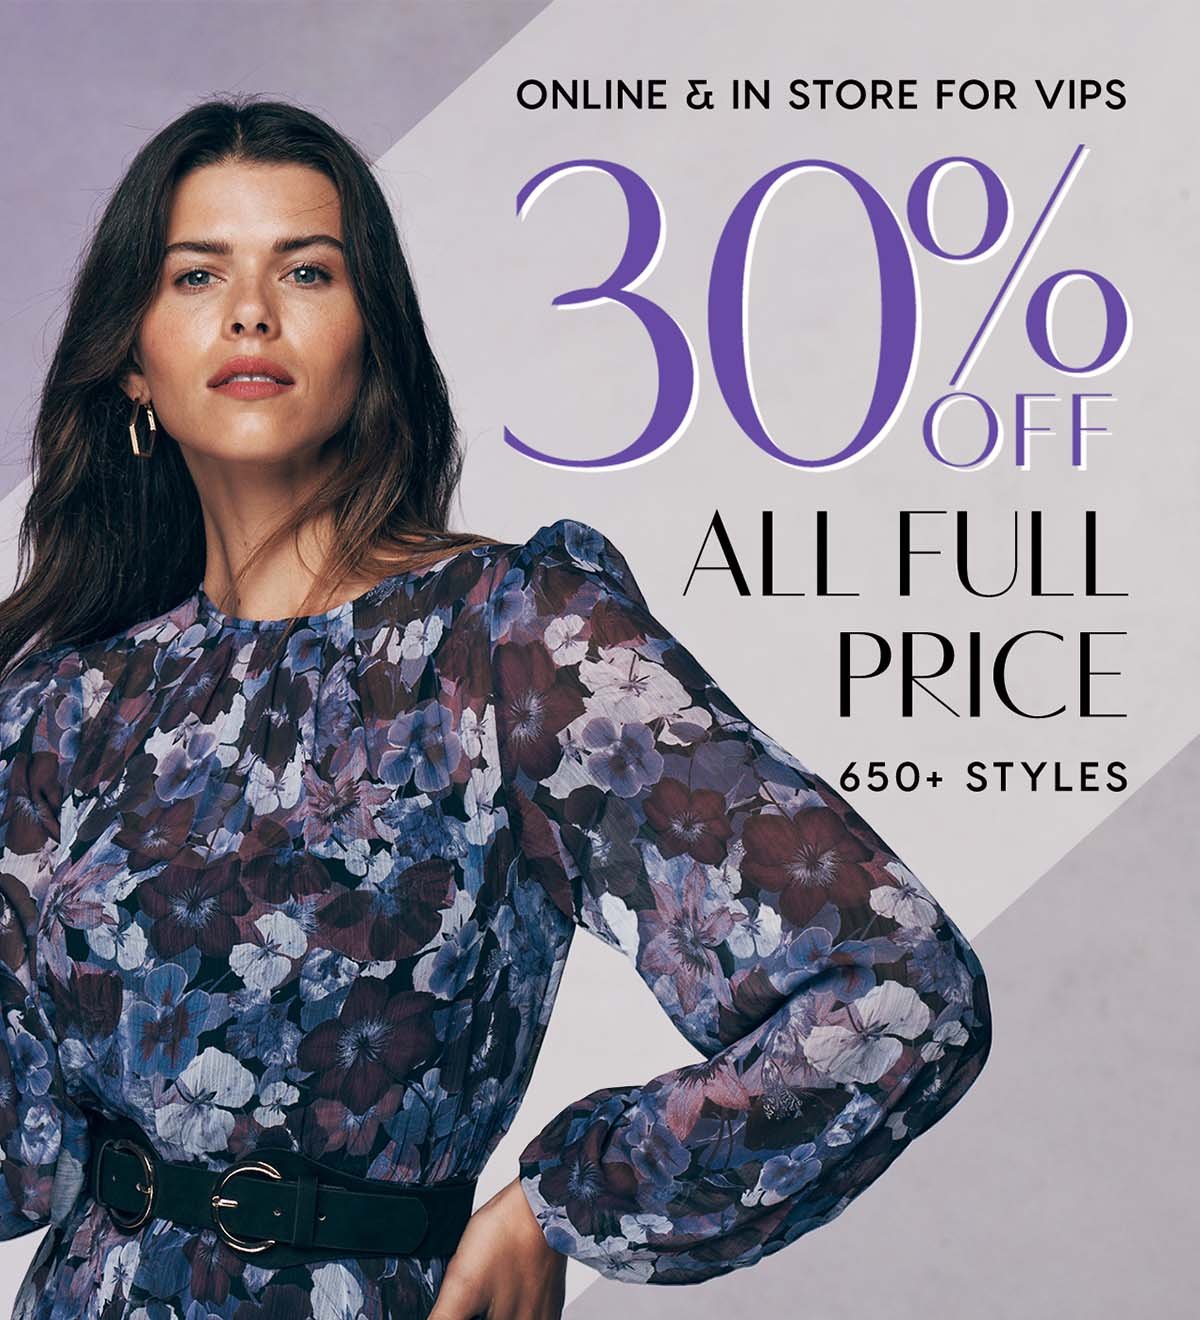 30% Off All Full Price. 650+ Styles. Online & In-Store For VIPs